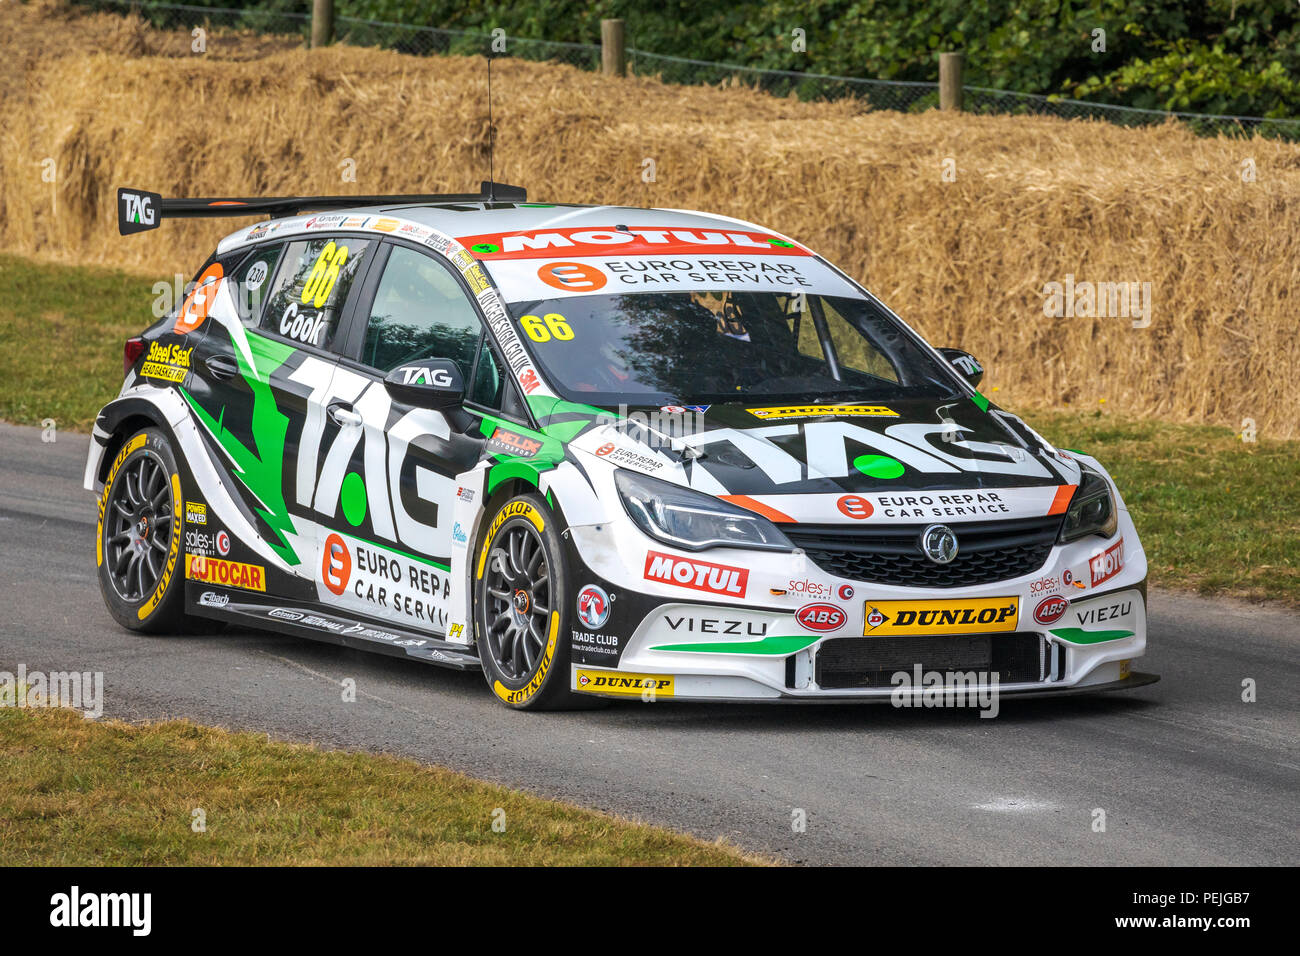 2018 Vauxhall Astra BTCC entrant with driver Josh Cook at the 2018 Goodwood Festival of Speed, Sussex, UK. Stock Photo